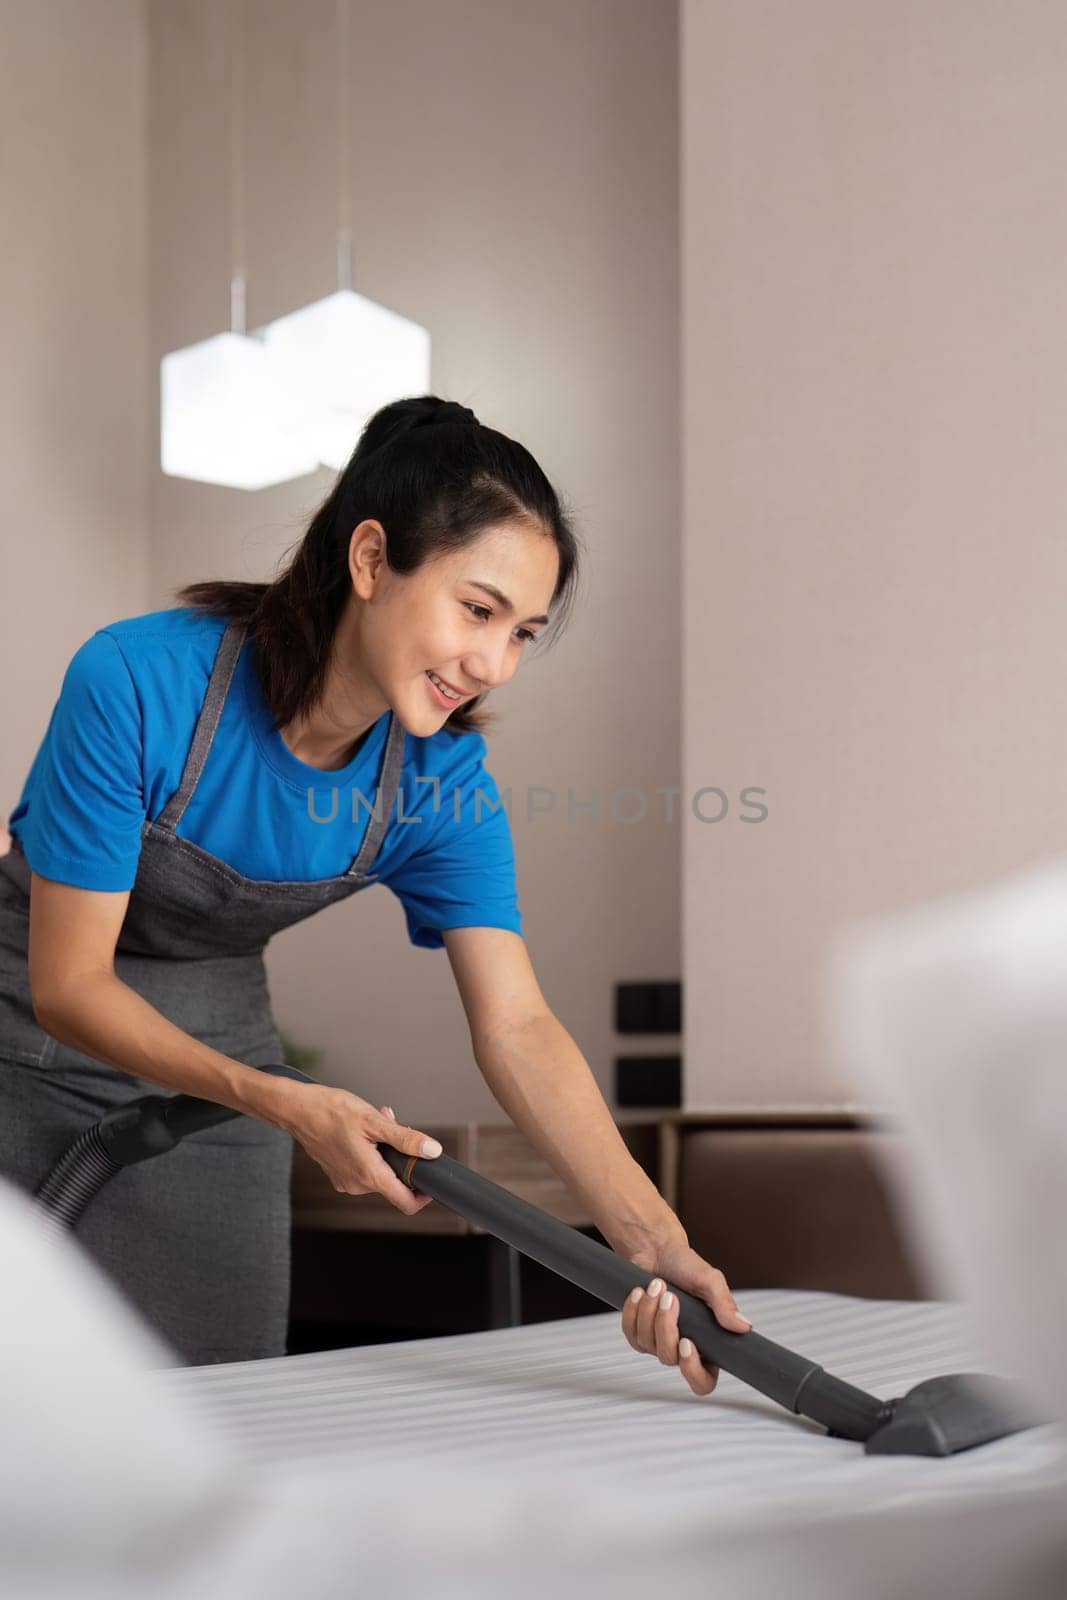 Cleaning service employee removing dirt from with professional equipment. Female housekeeper cleaning the mattress on the bed with vacuum cleaner by nateemee